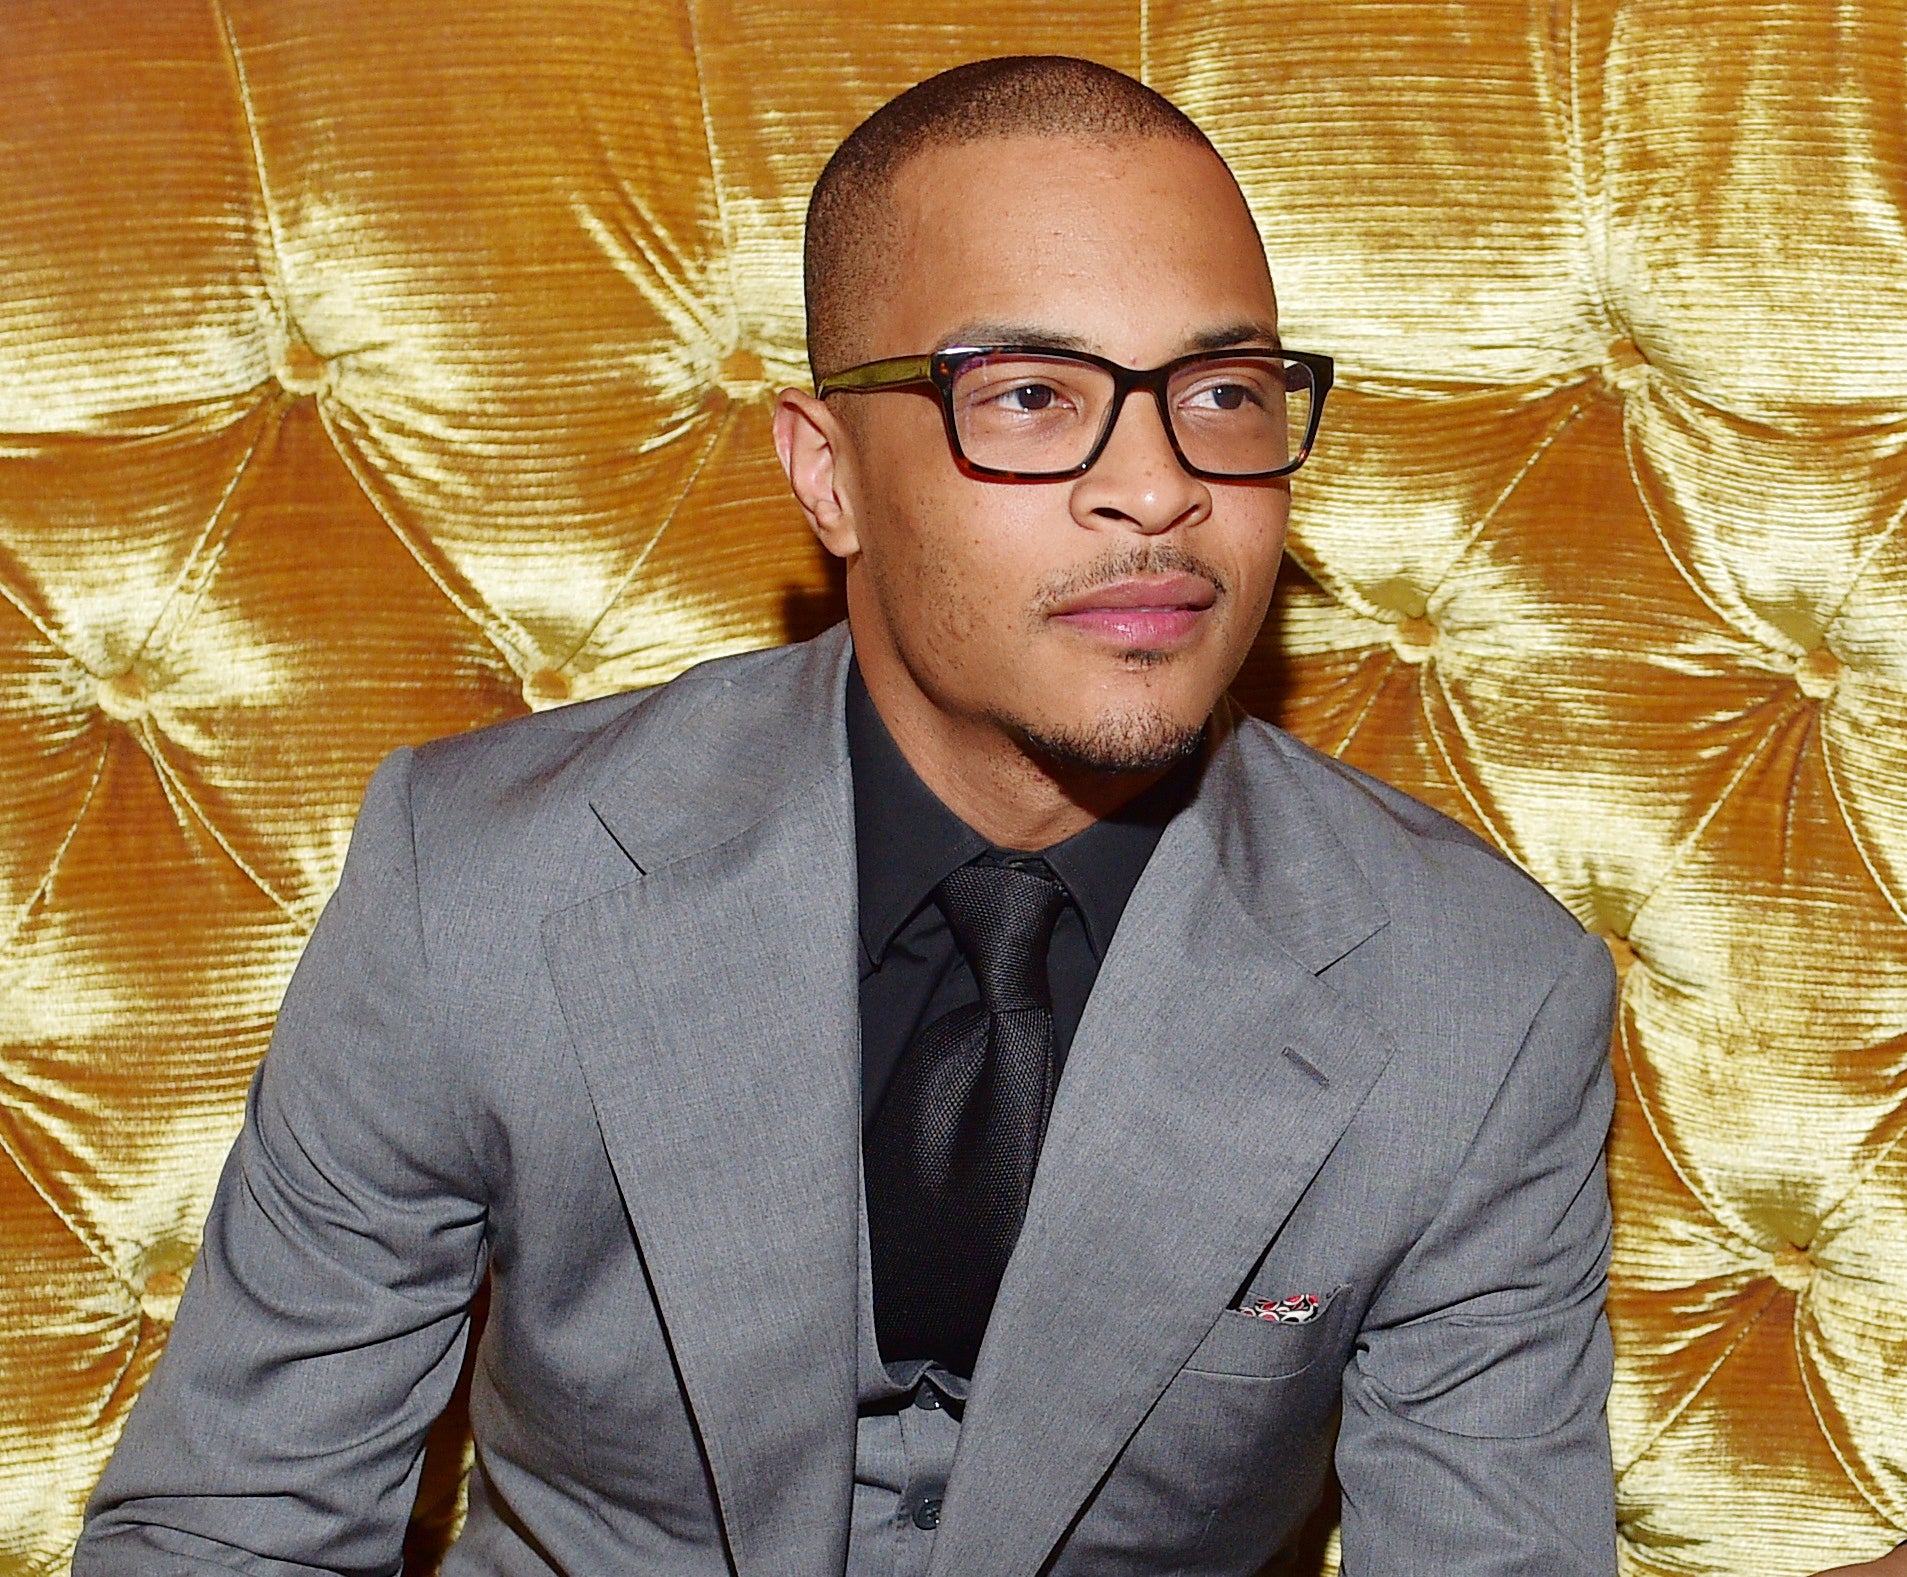 T.I. Pens Poem to Hashtag Activists: 'Society's Issues Are Deeper Than Social Media Posts'